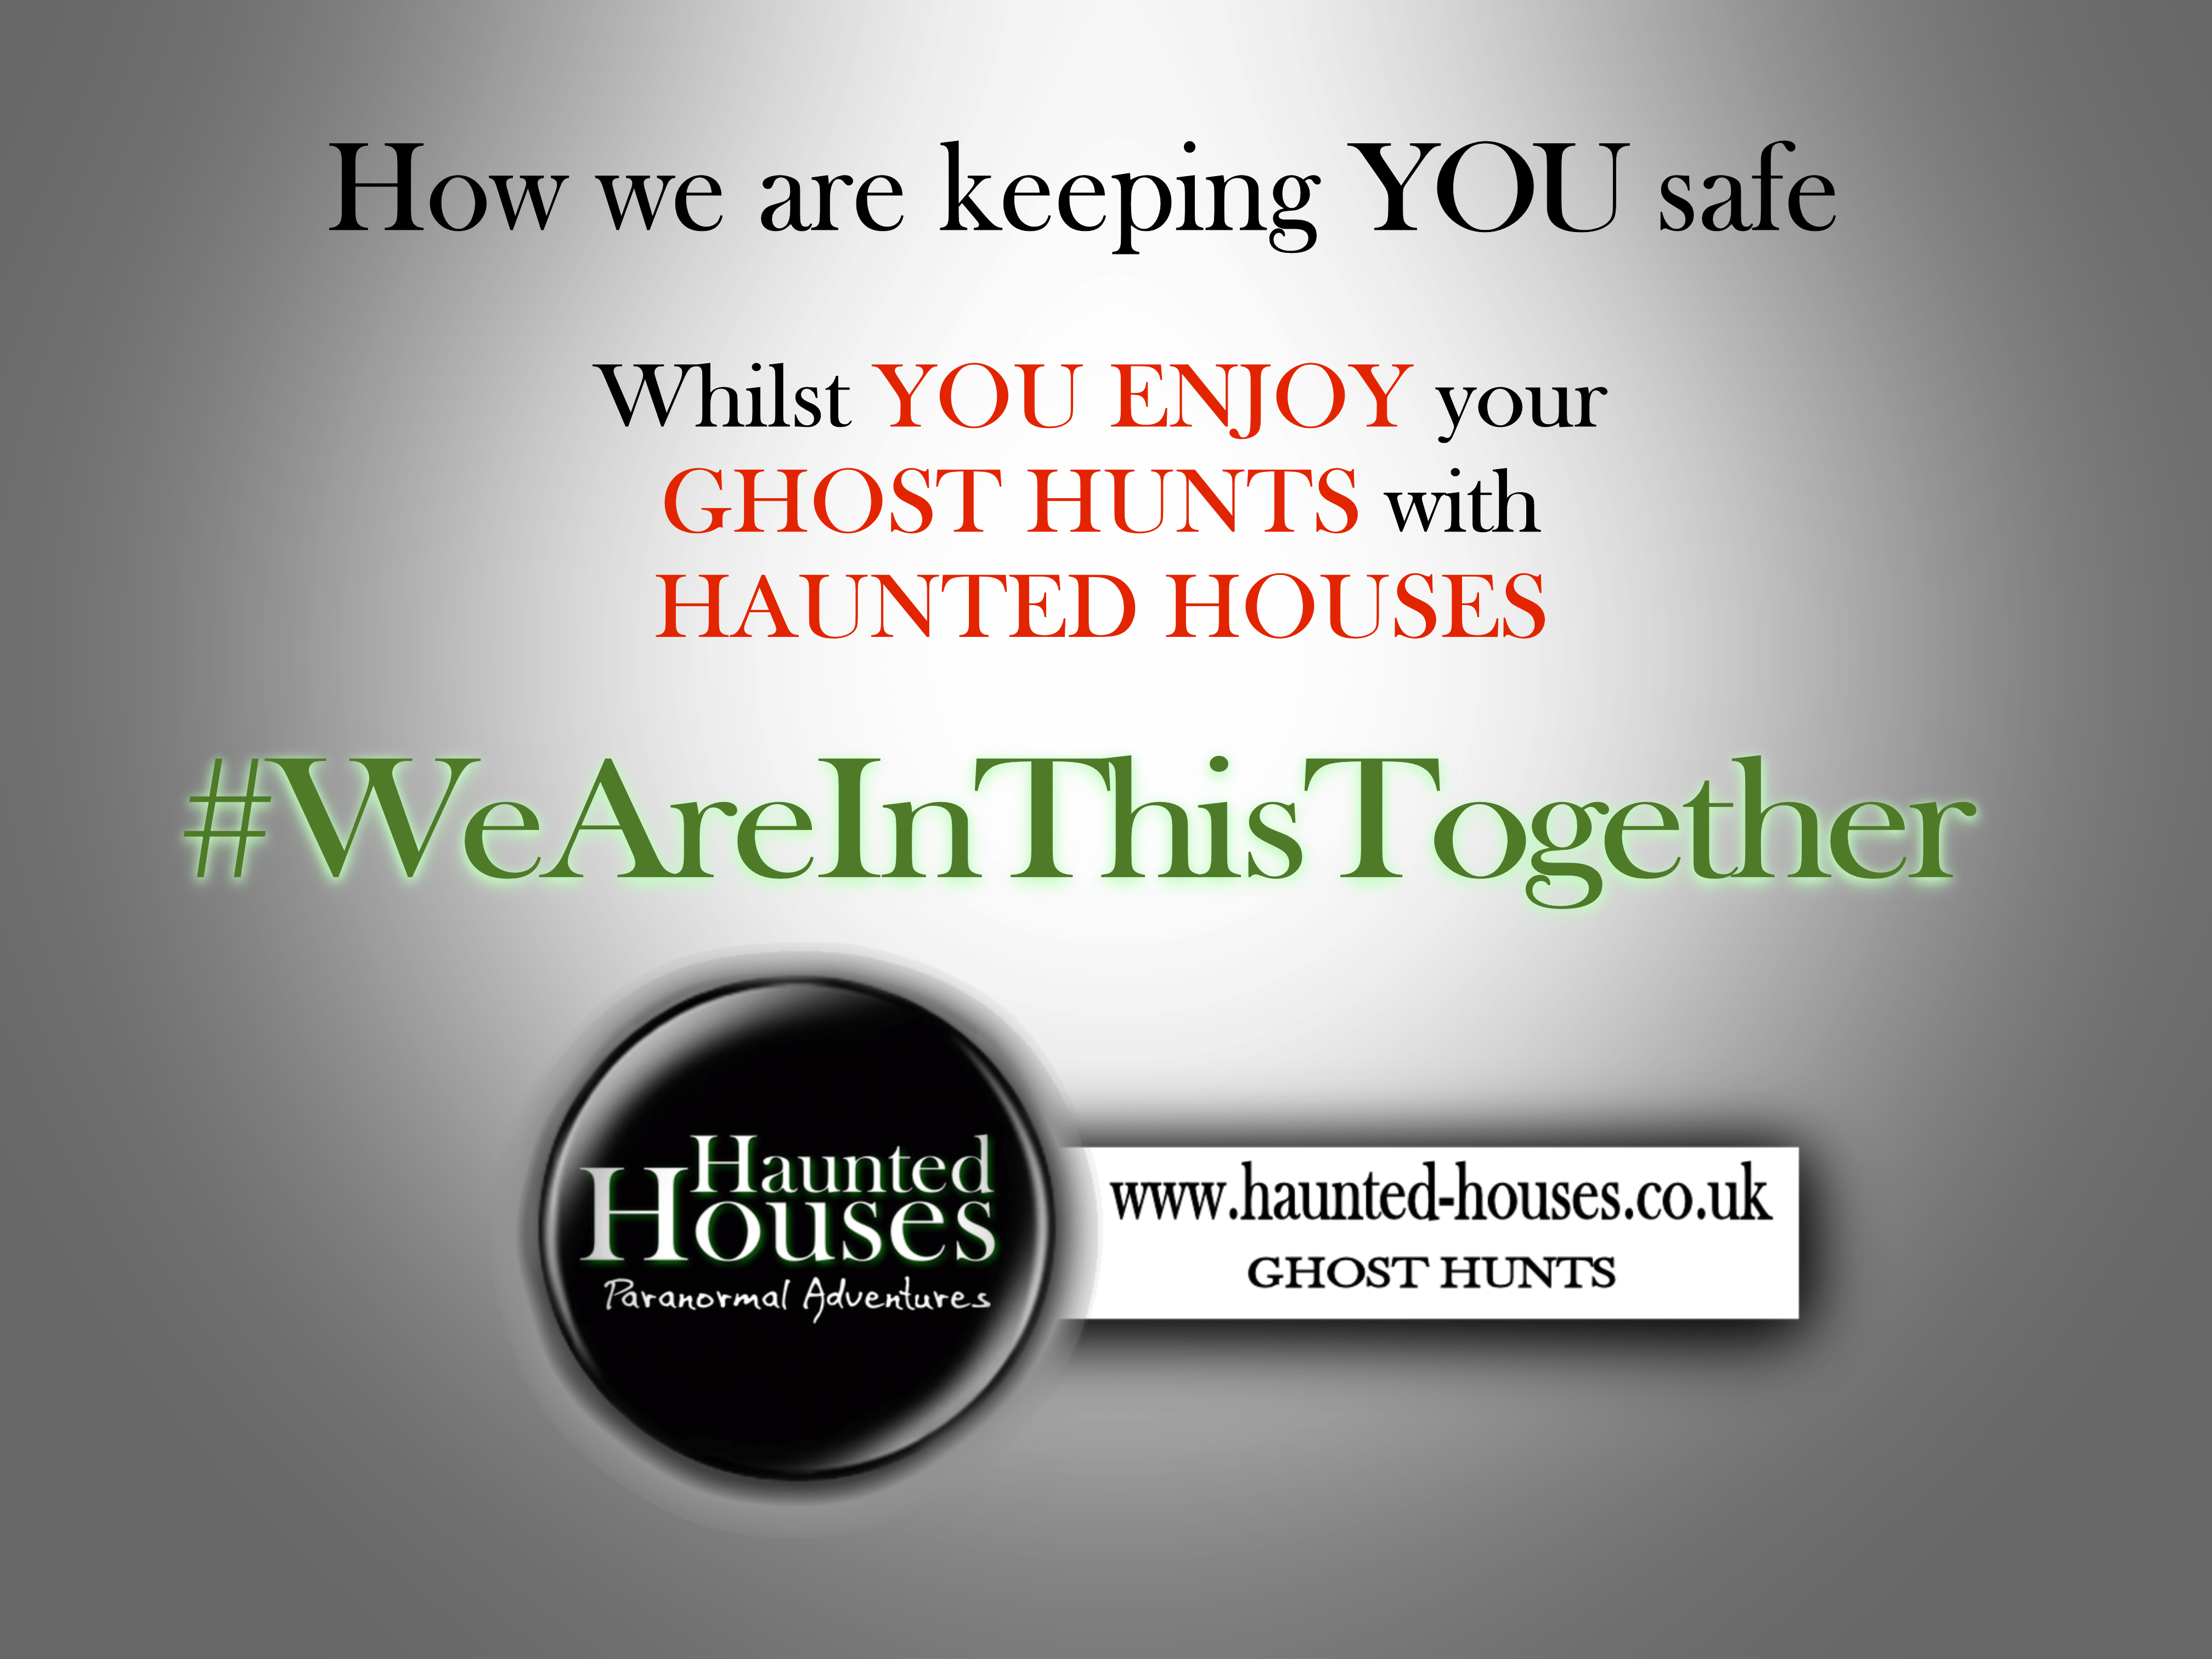 How we are keeping you safe on a ghost hunt